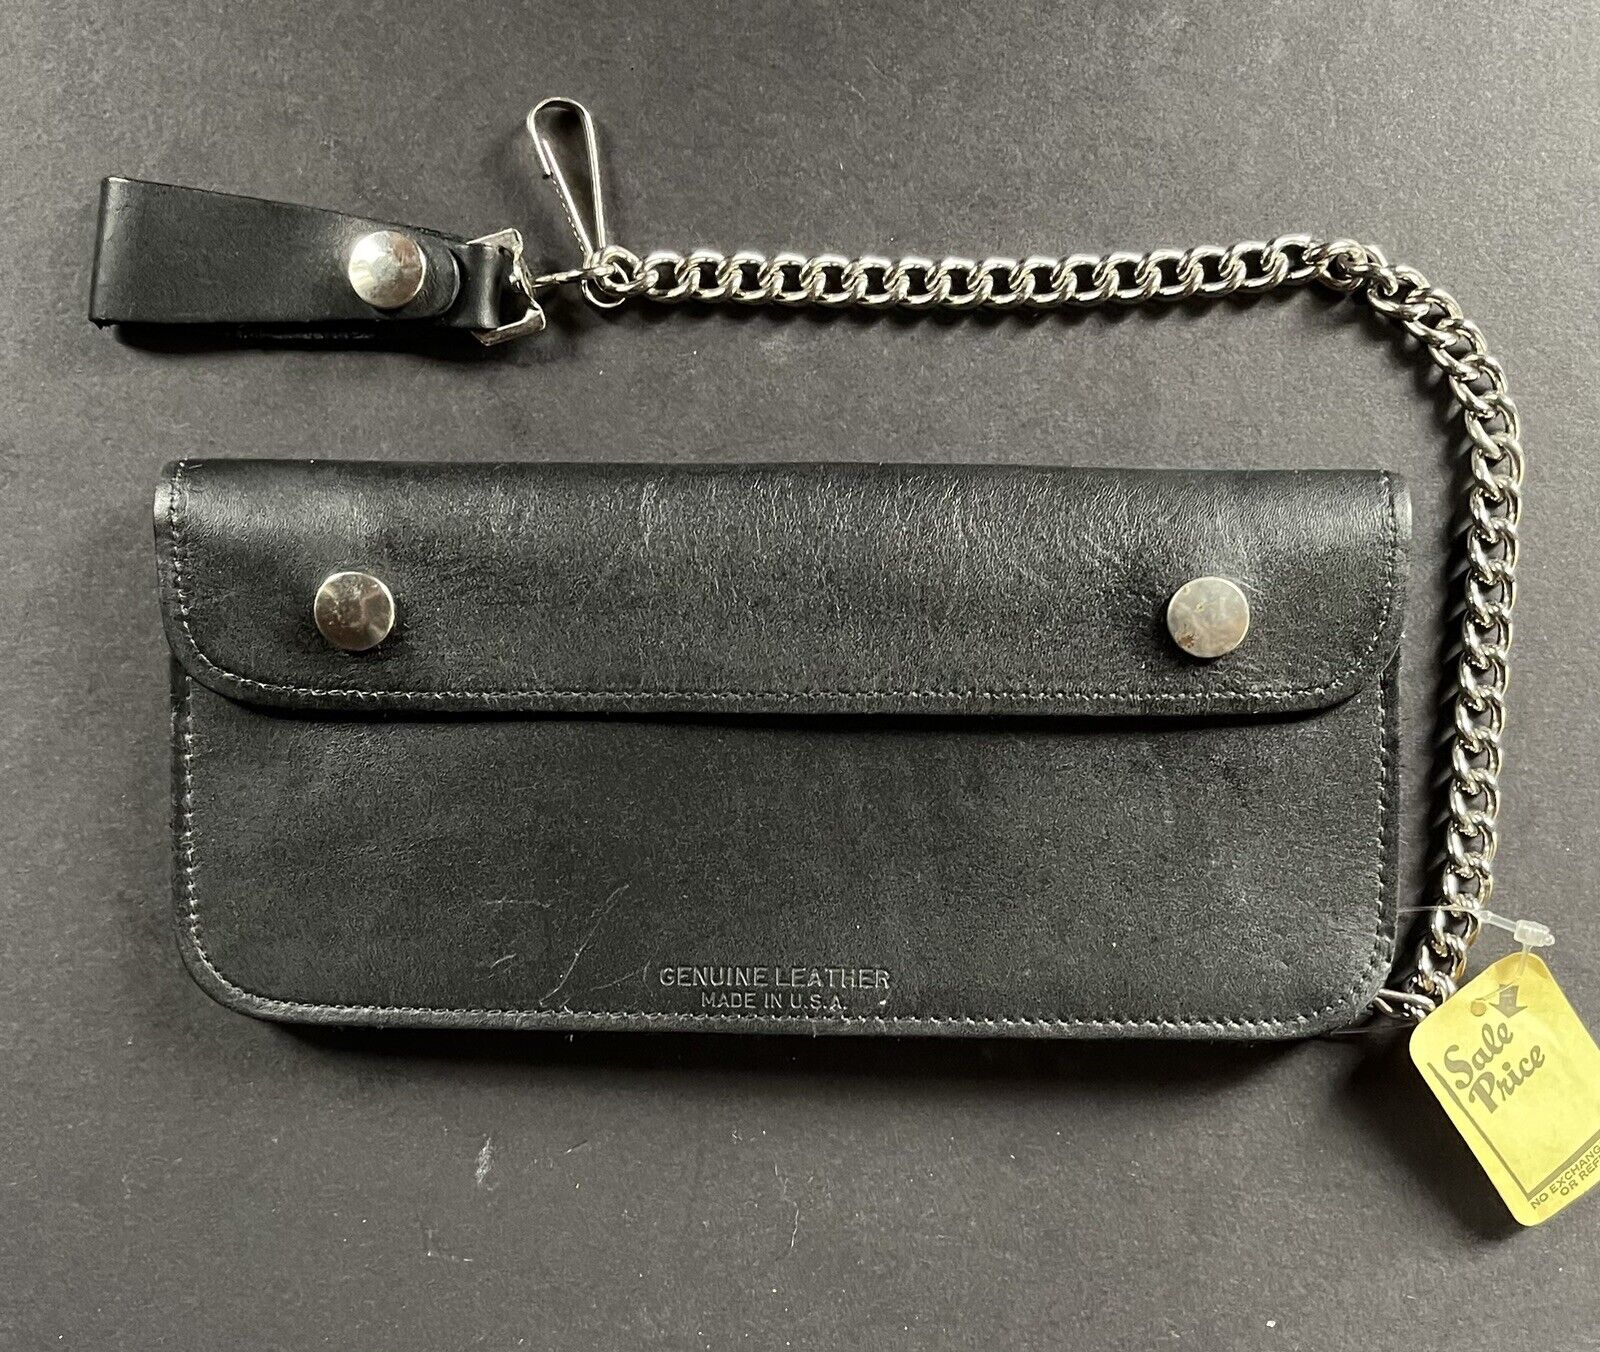 Deadstock NOS VTG 70s LARGE XL Black Leather Motorcycle Chain Wallet MC Chopper